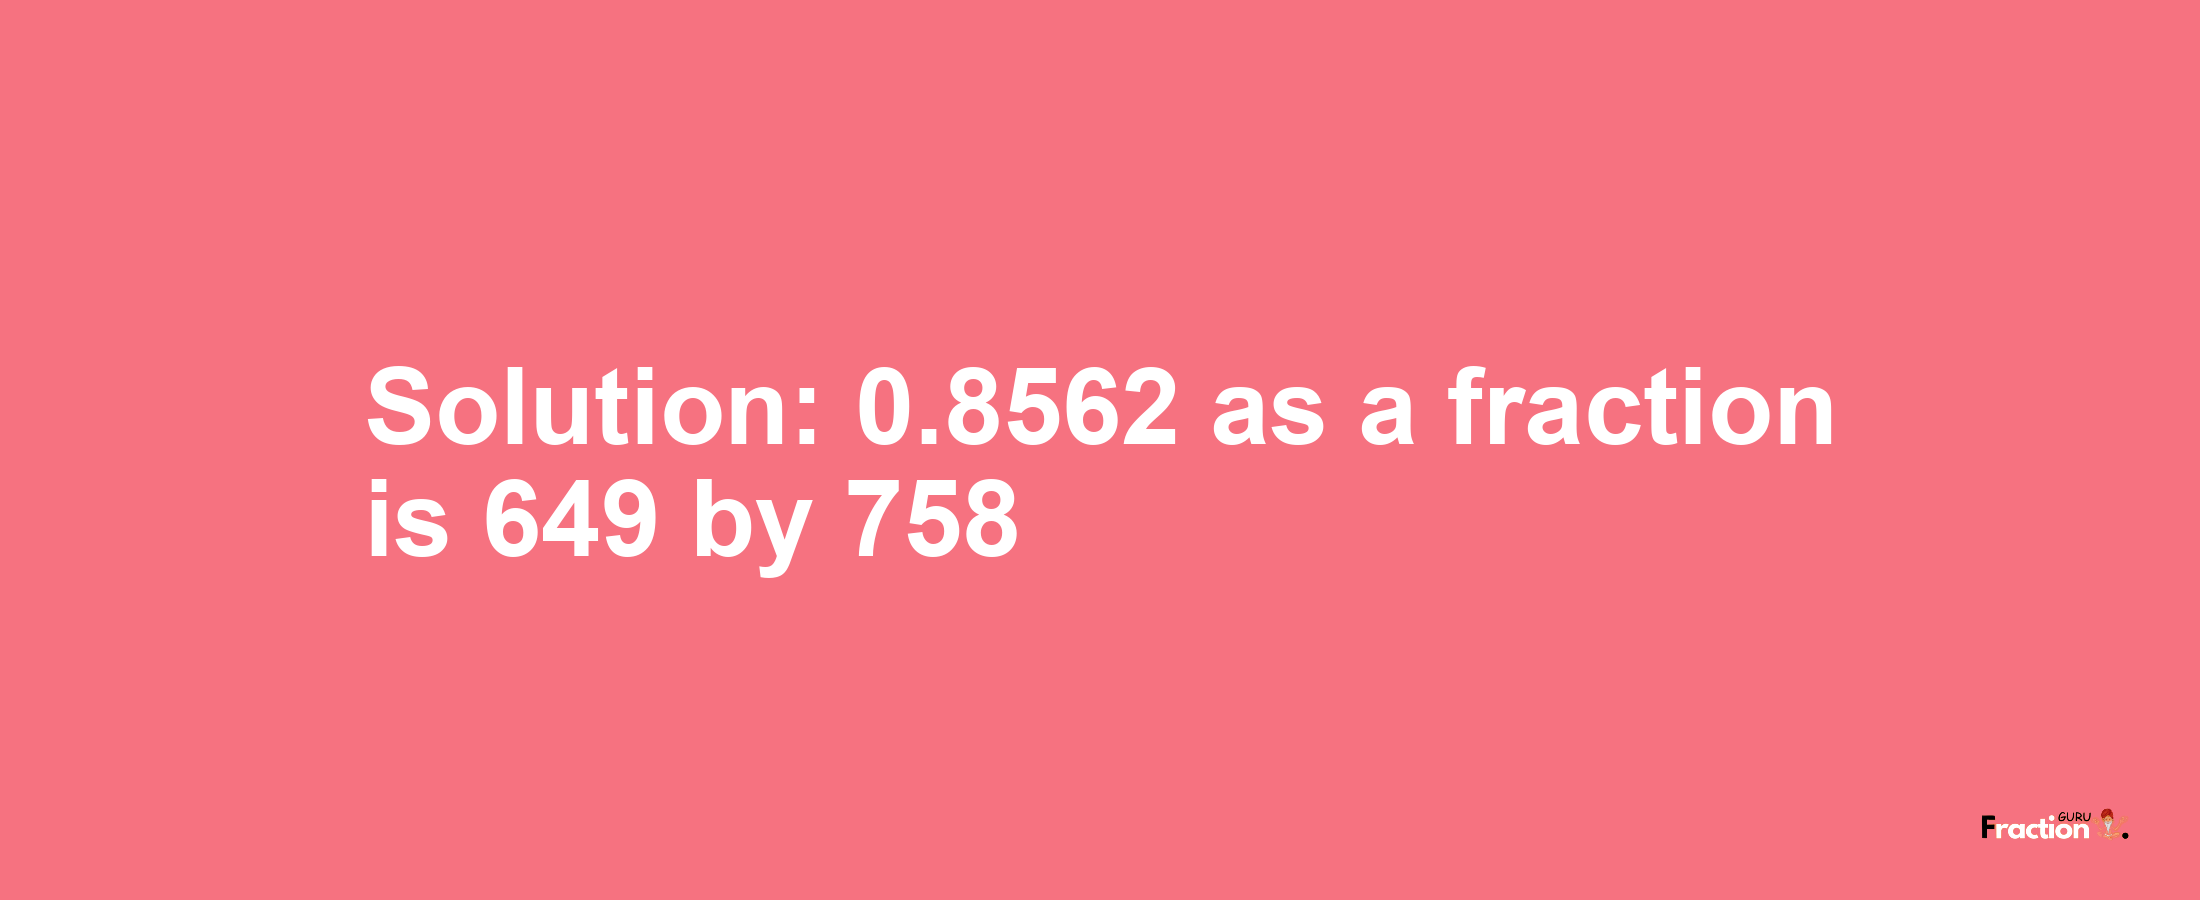 Solution:0.8562 as a fraction is 649/758